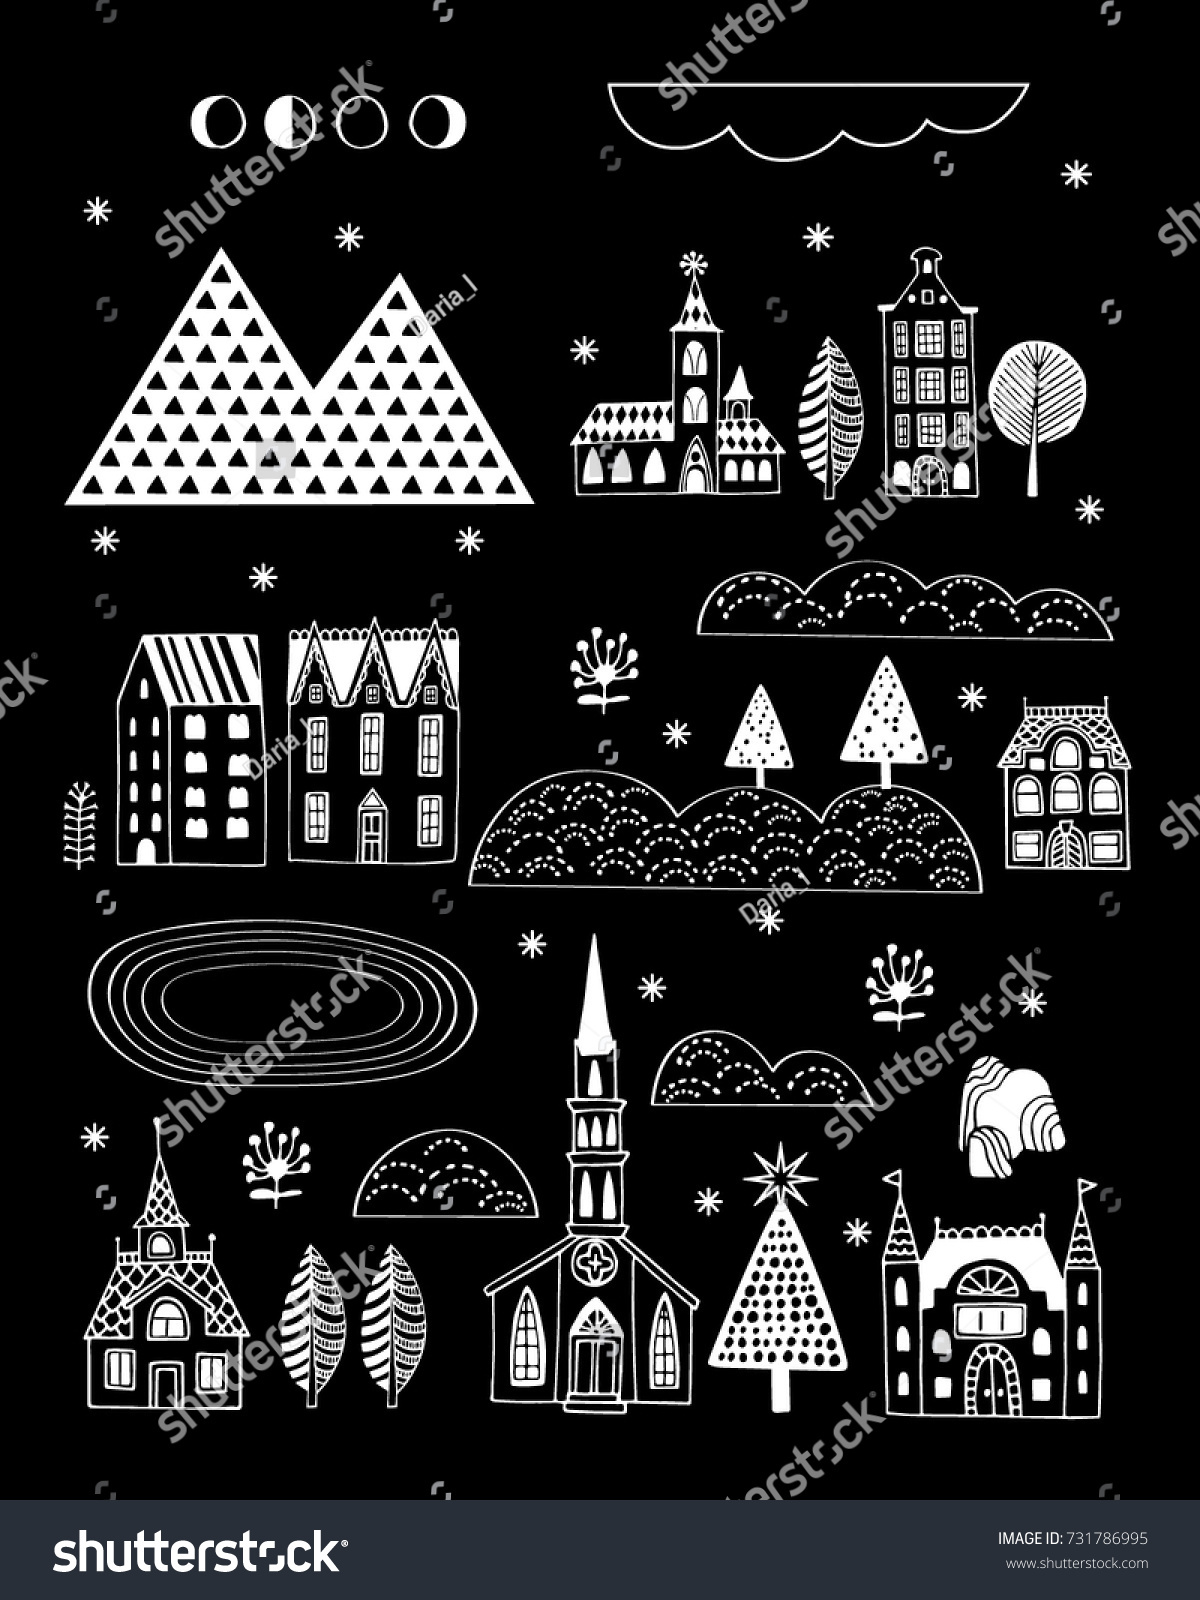 Illustrated black and white poster in Scandinavian style with images of houses and nature Can